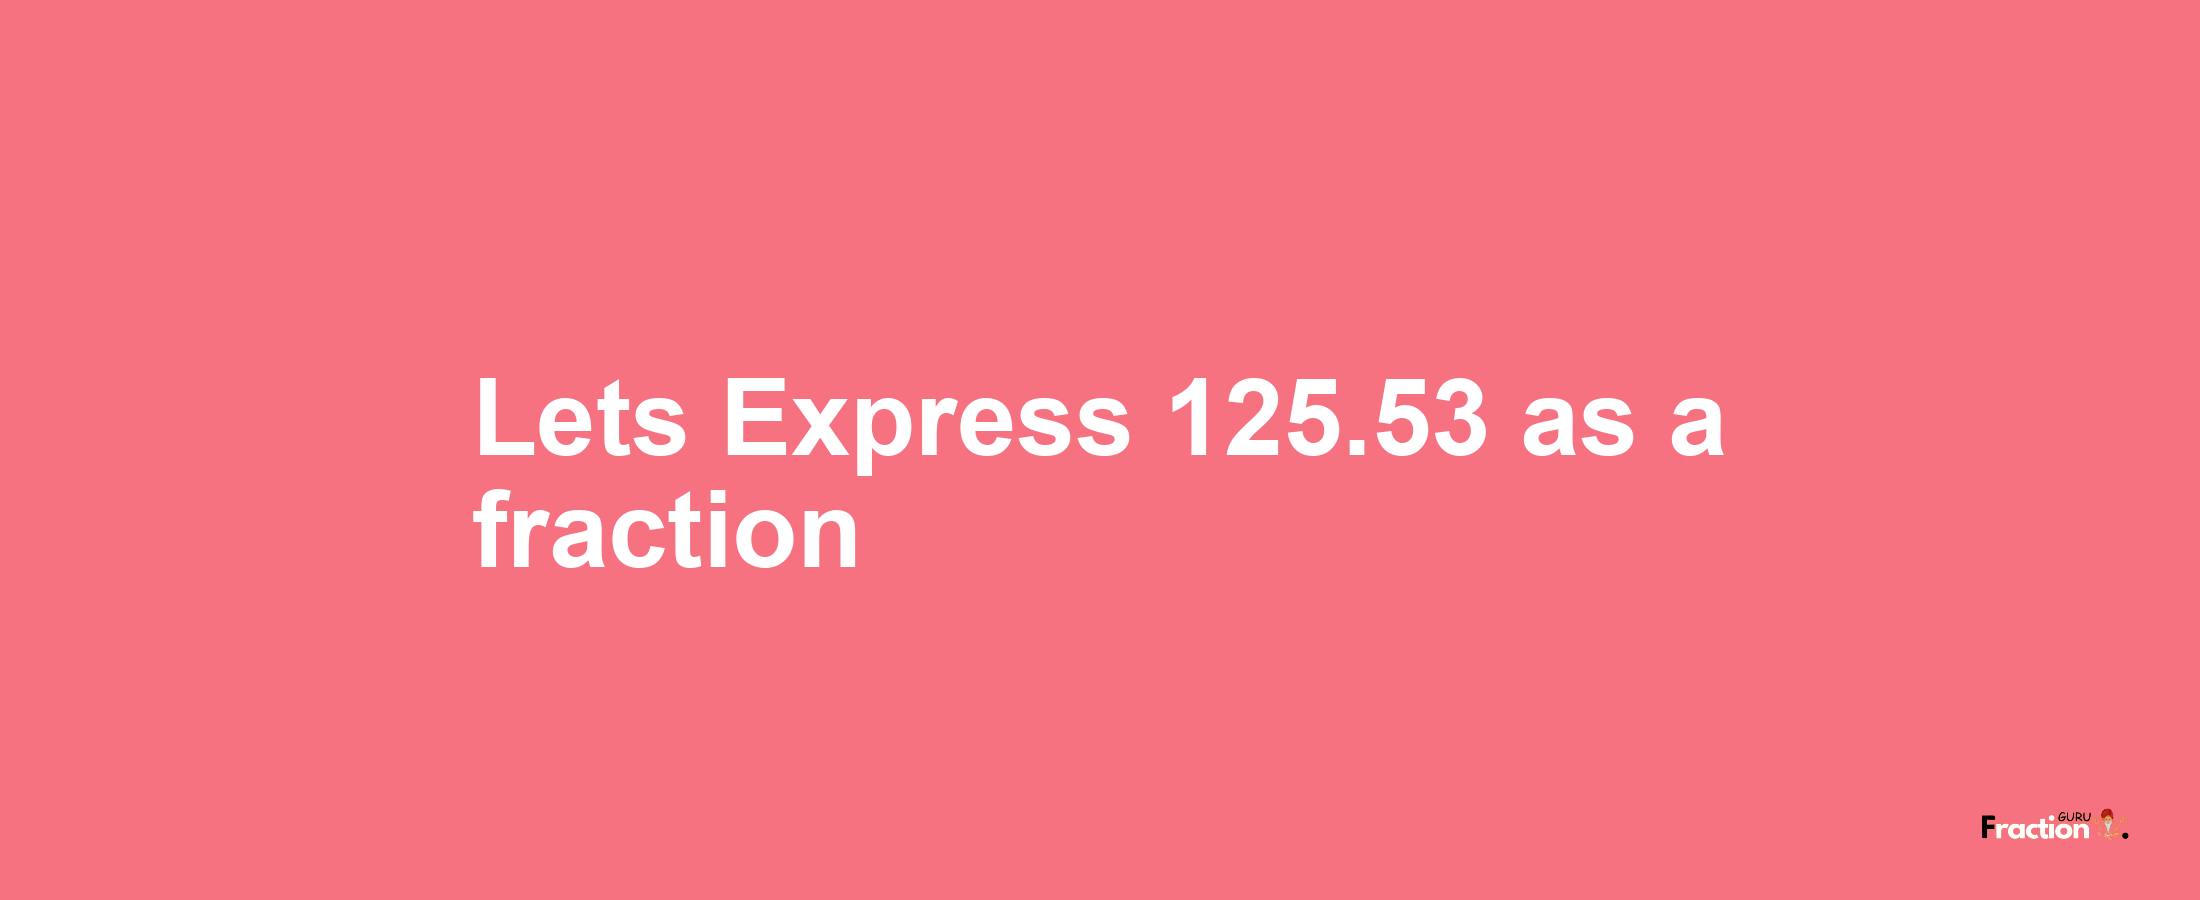 Lets Express 125.53 as afraction